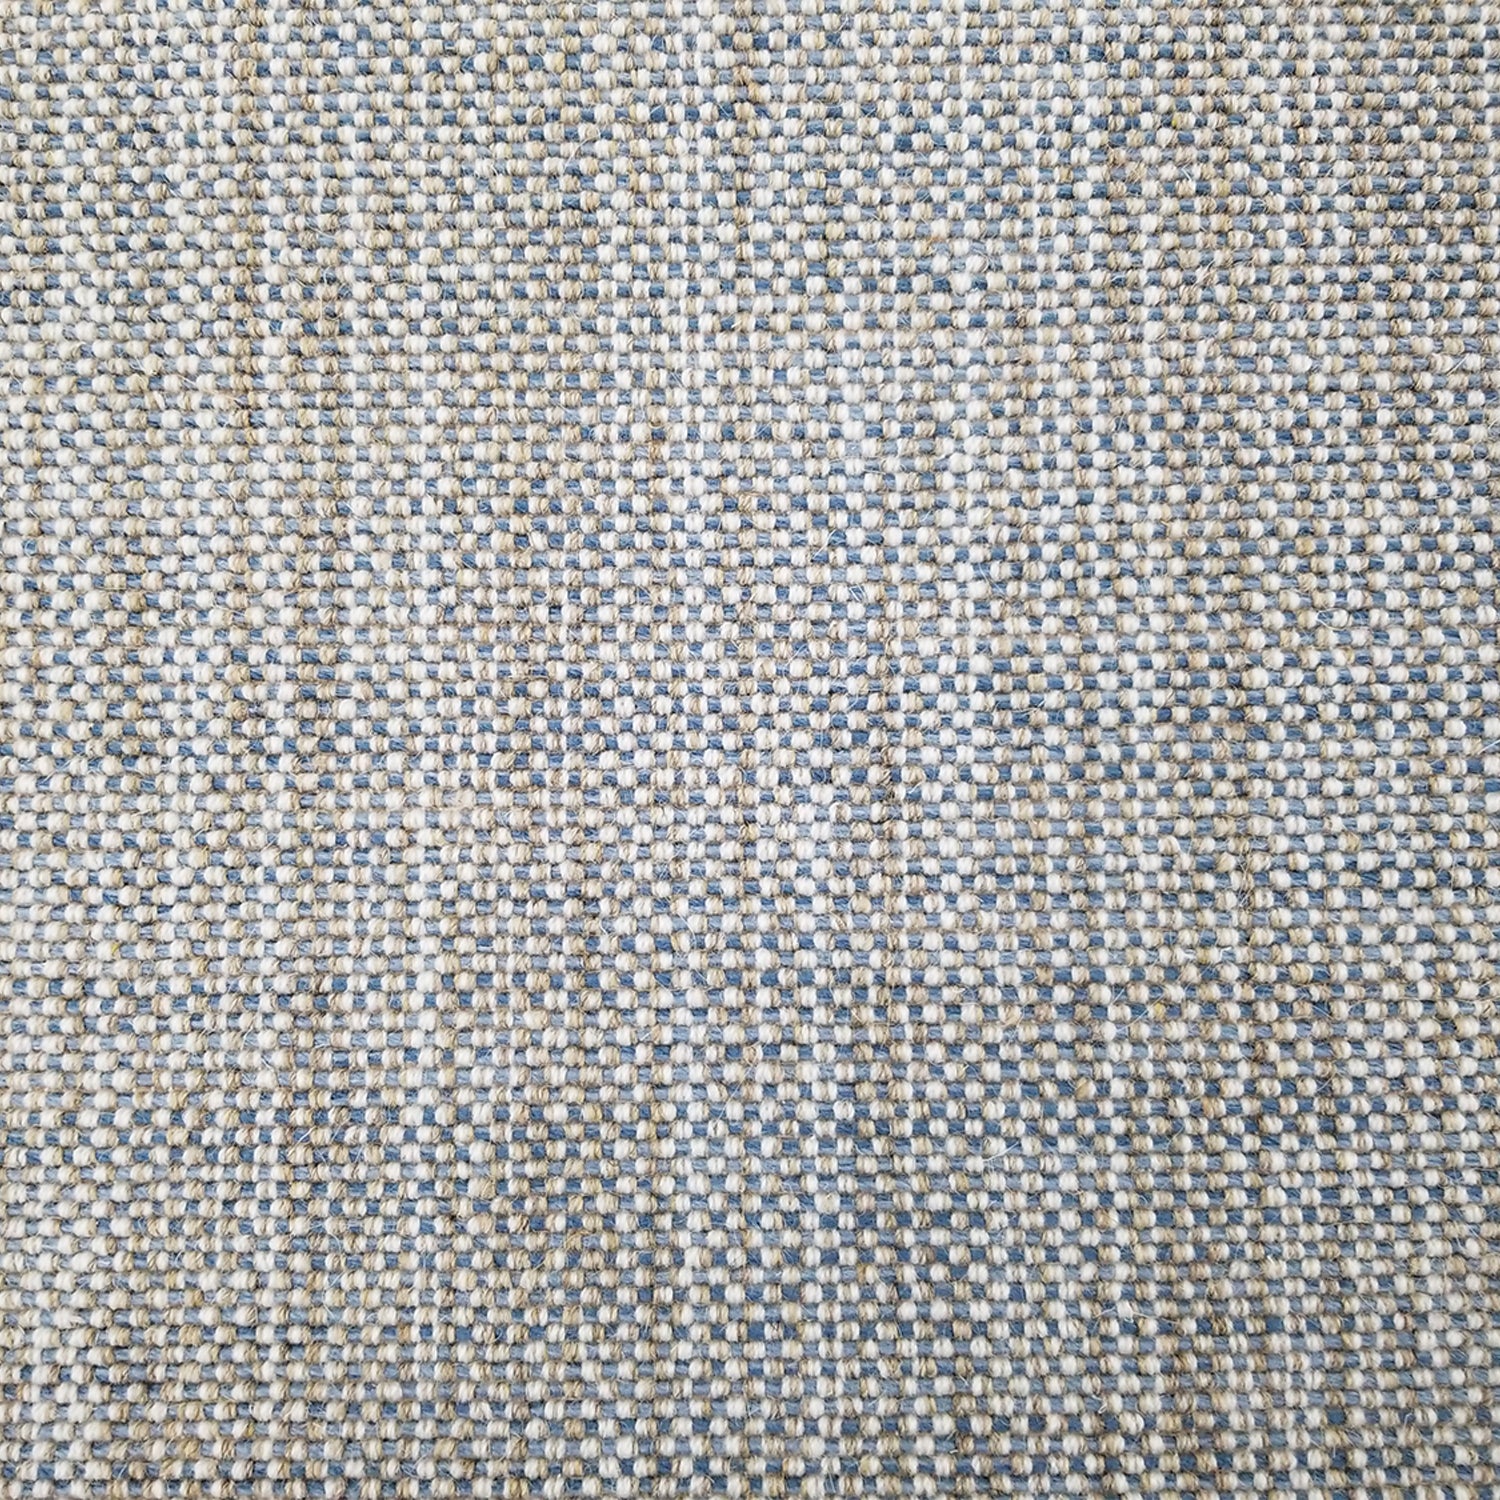 Wool broadloom carpet swatch in a checked woven pattern in blue, cream and tan.